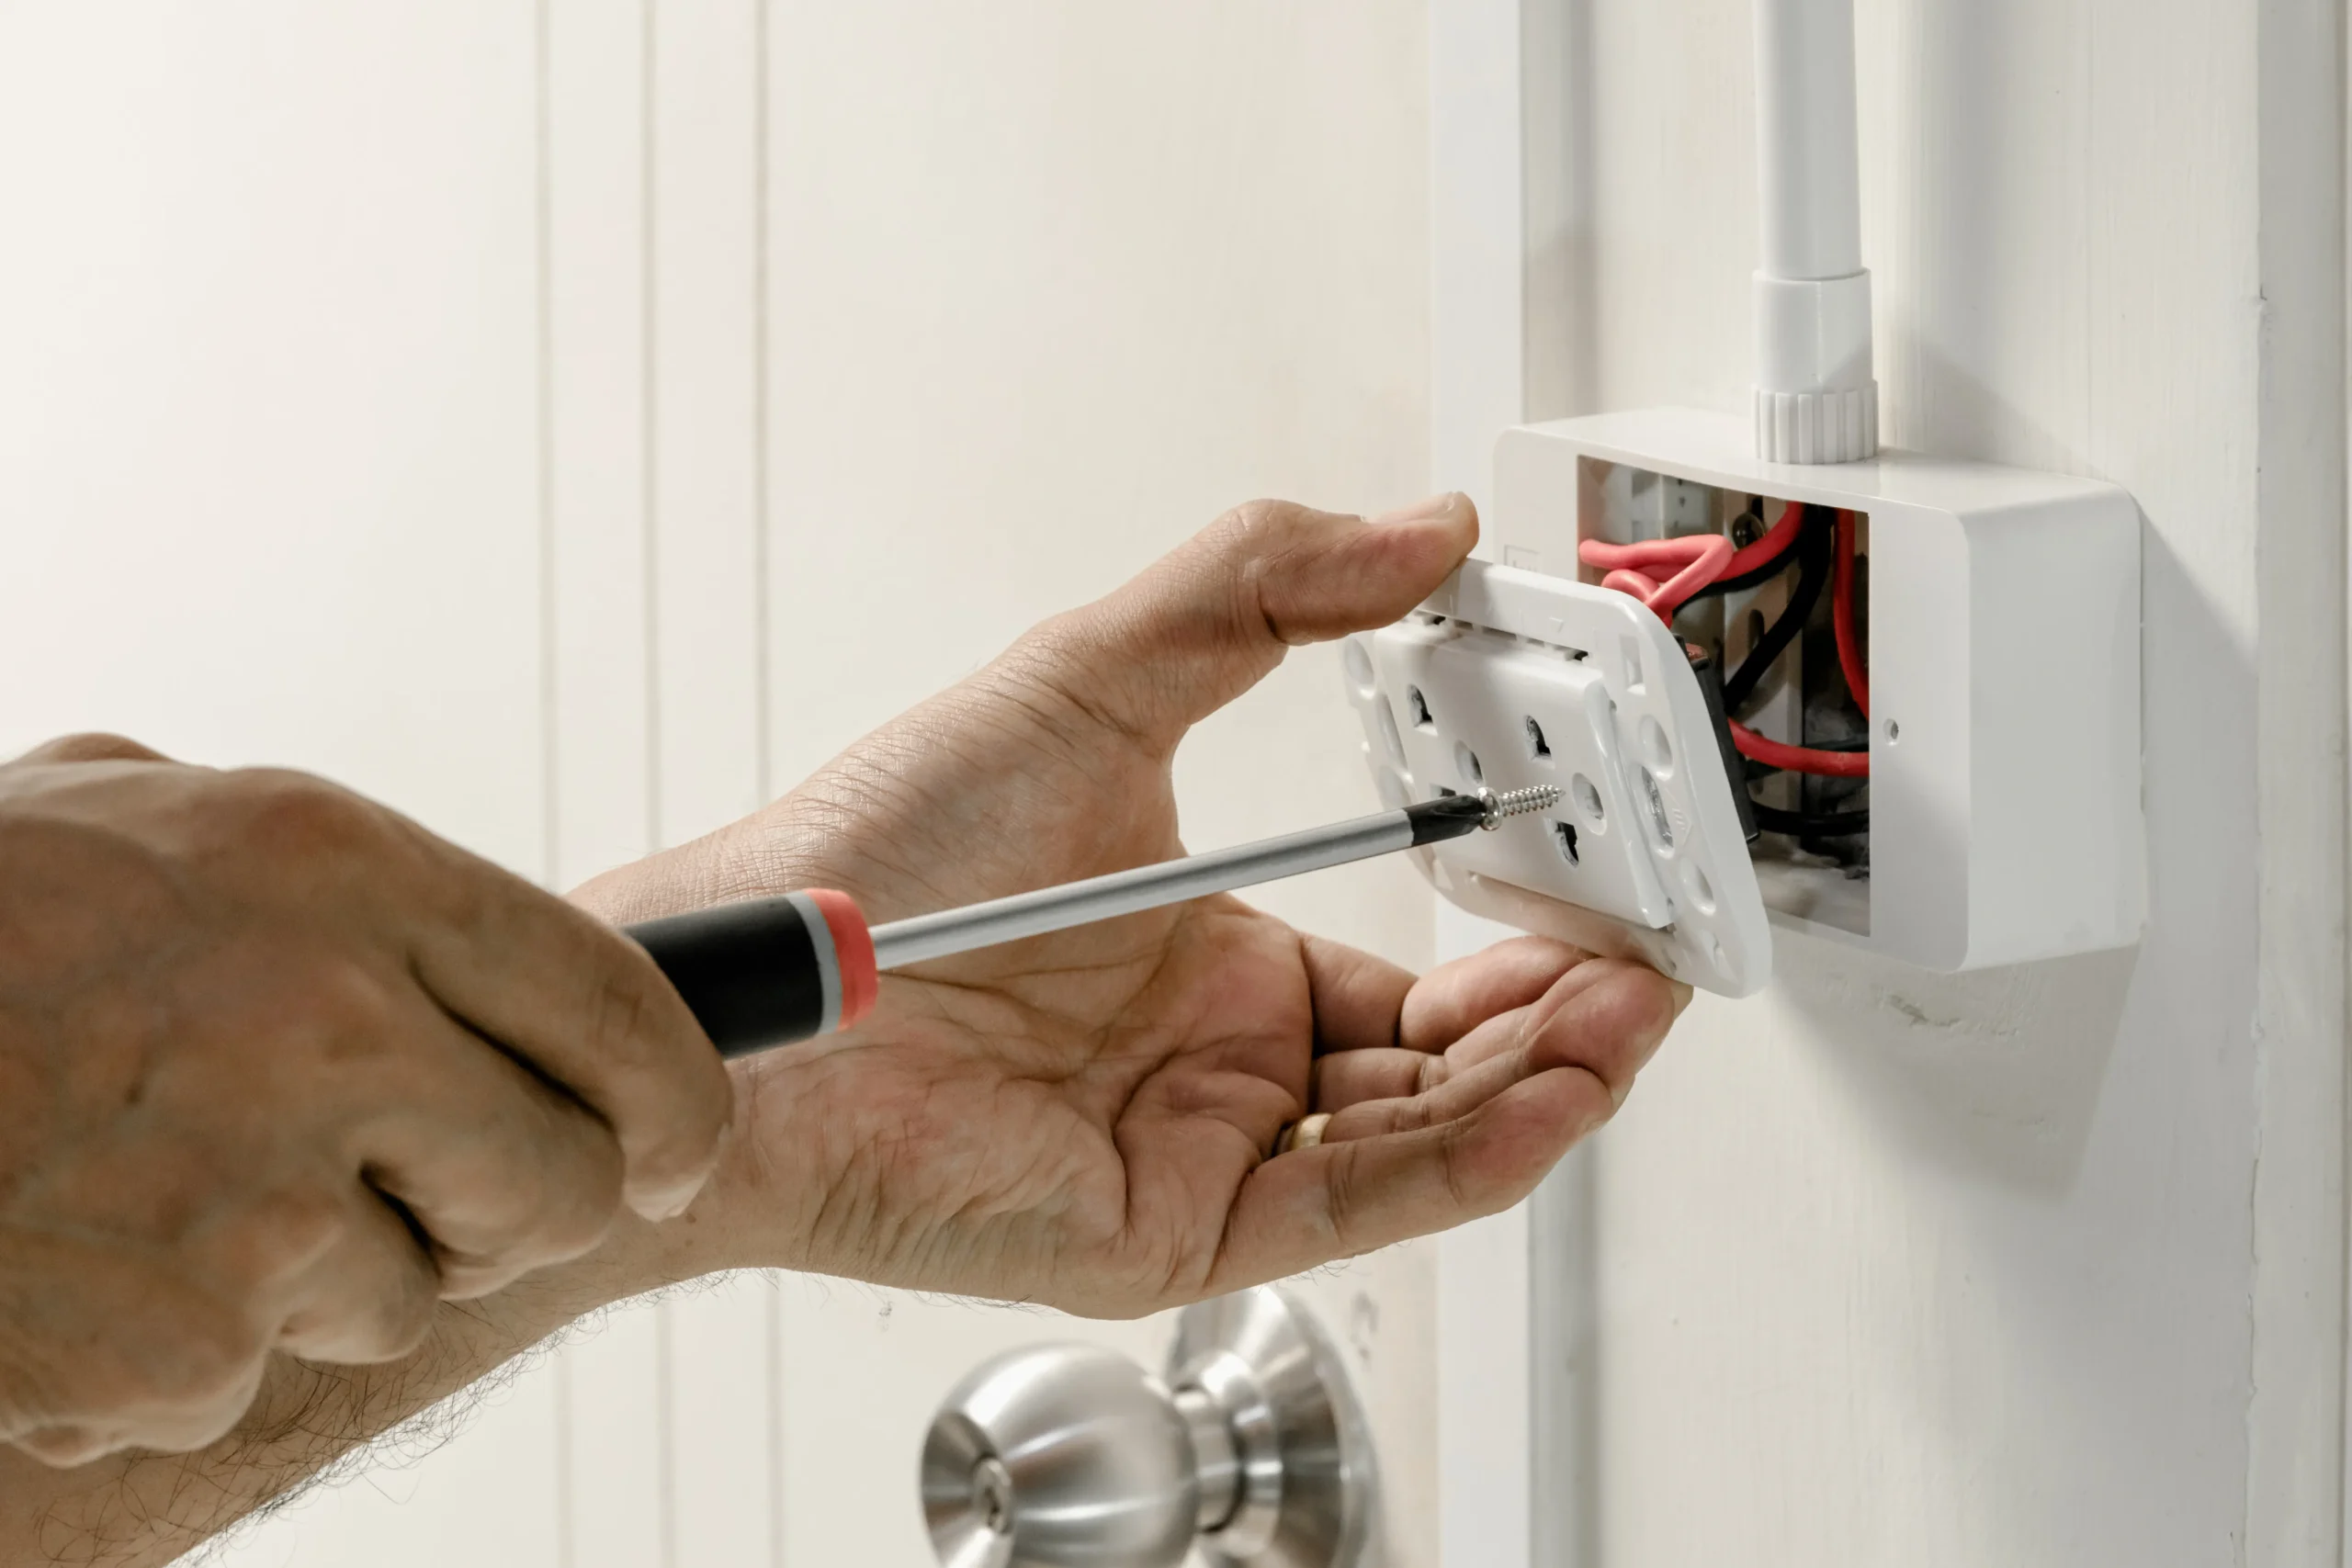 Electrical Outlet Installation And Replacement In Orange County, CA